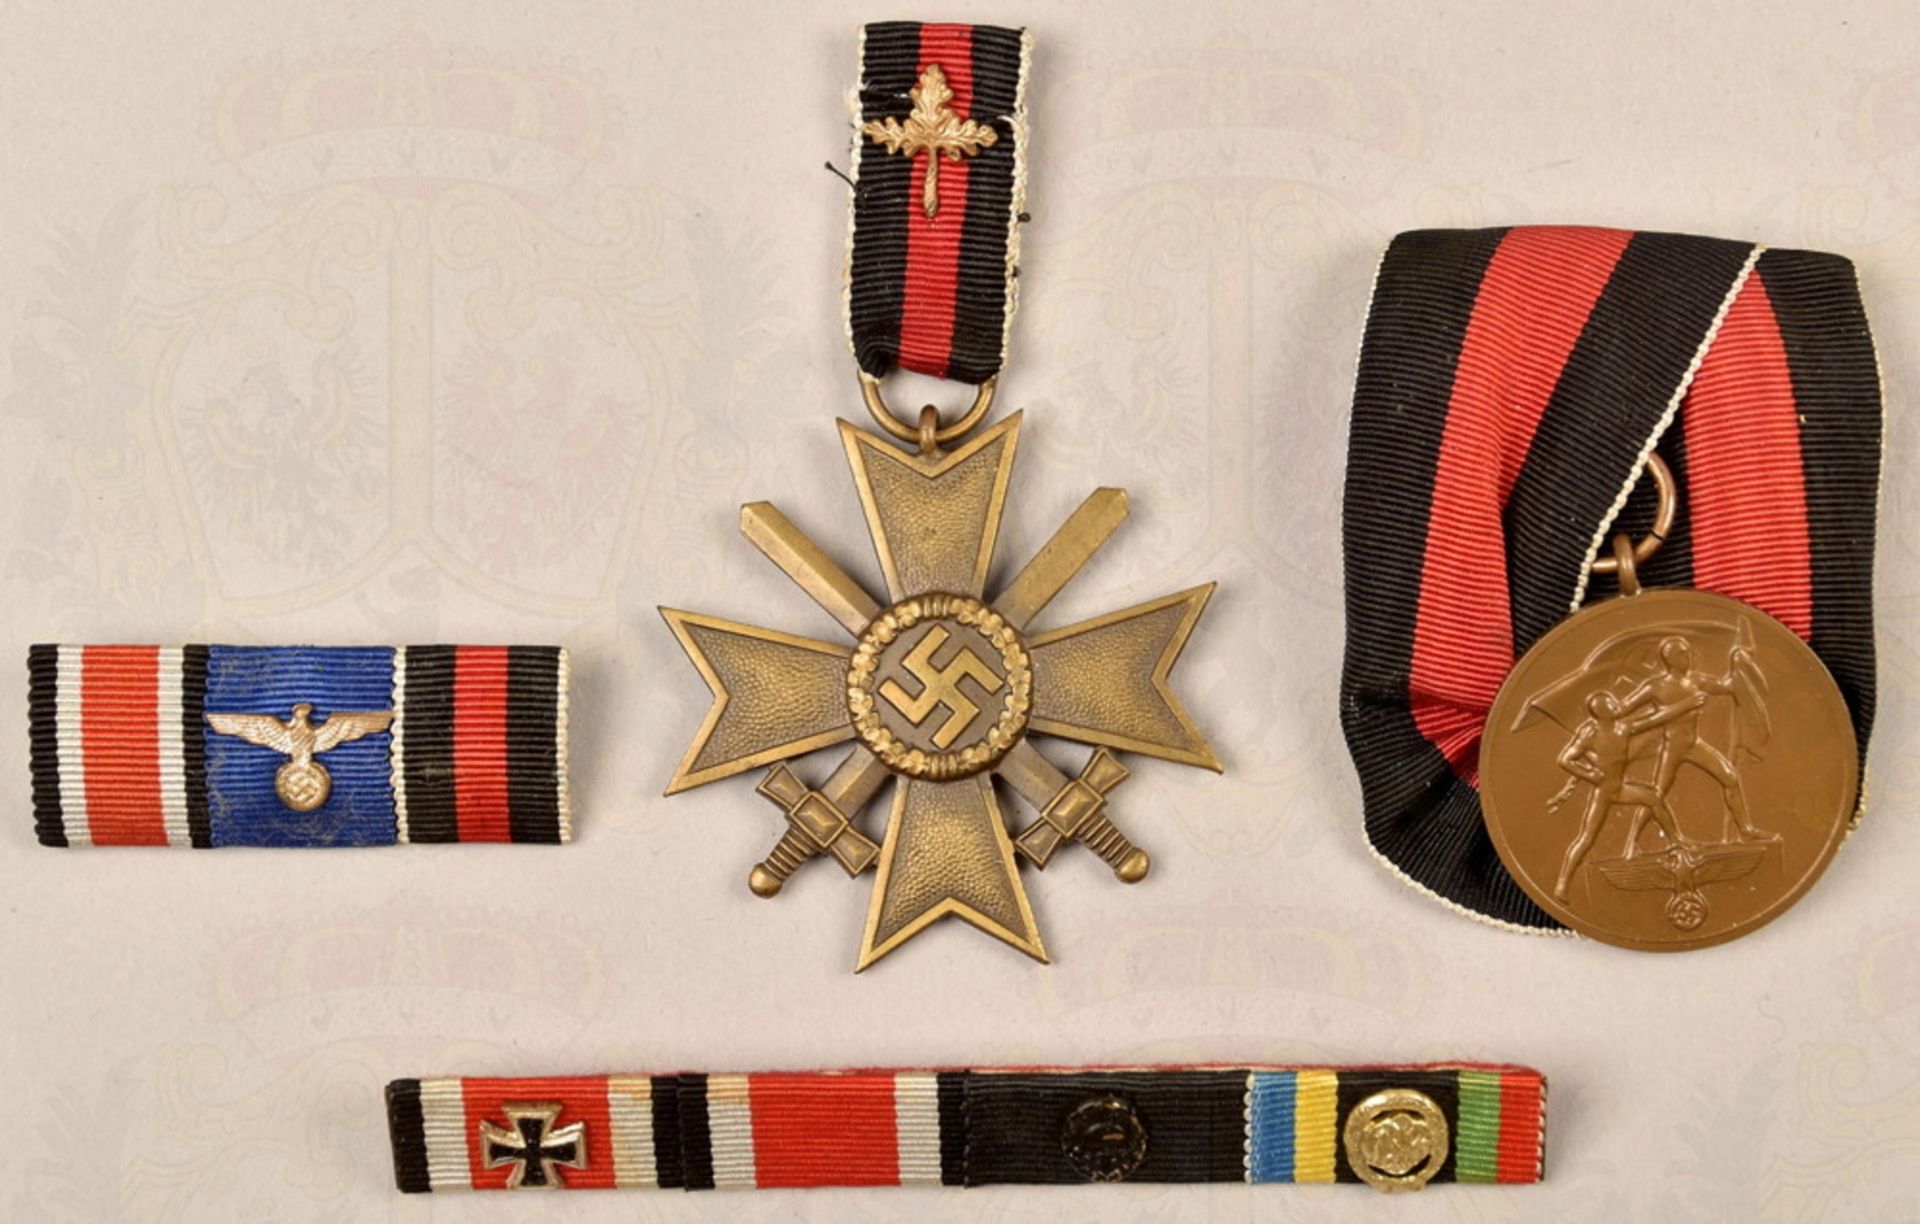 Sudeten Medal 1938 and War Merit Cross 2nd Class with Swords - Image 2 of 3